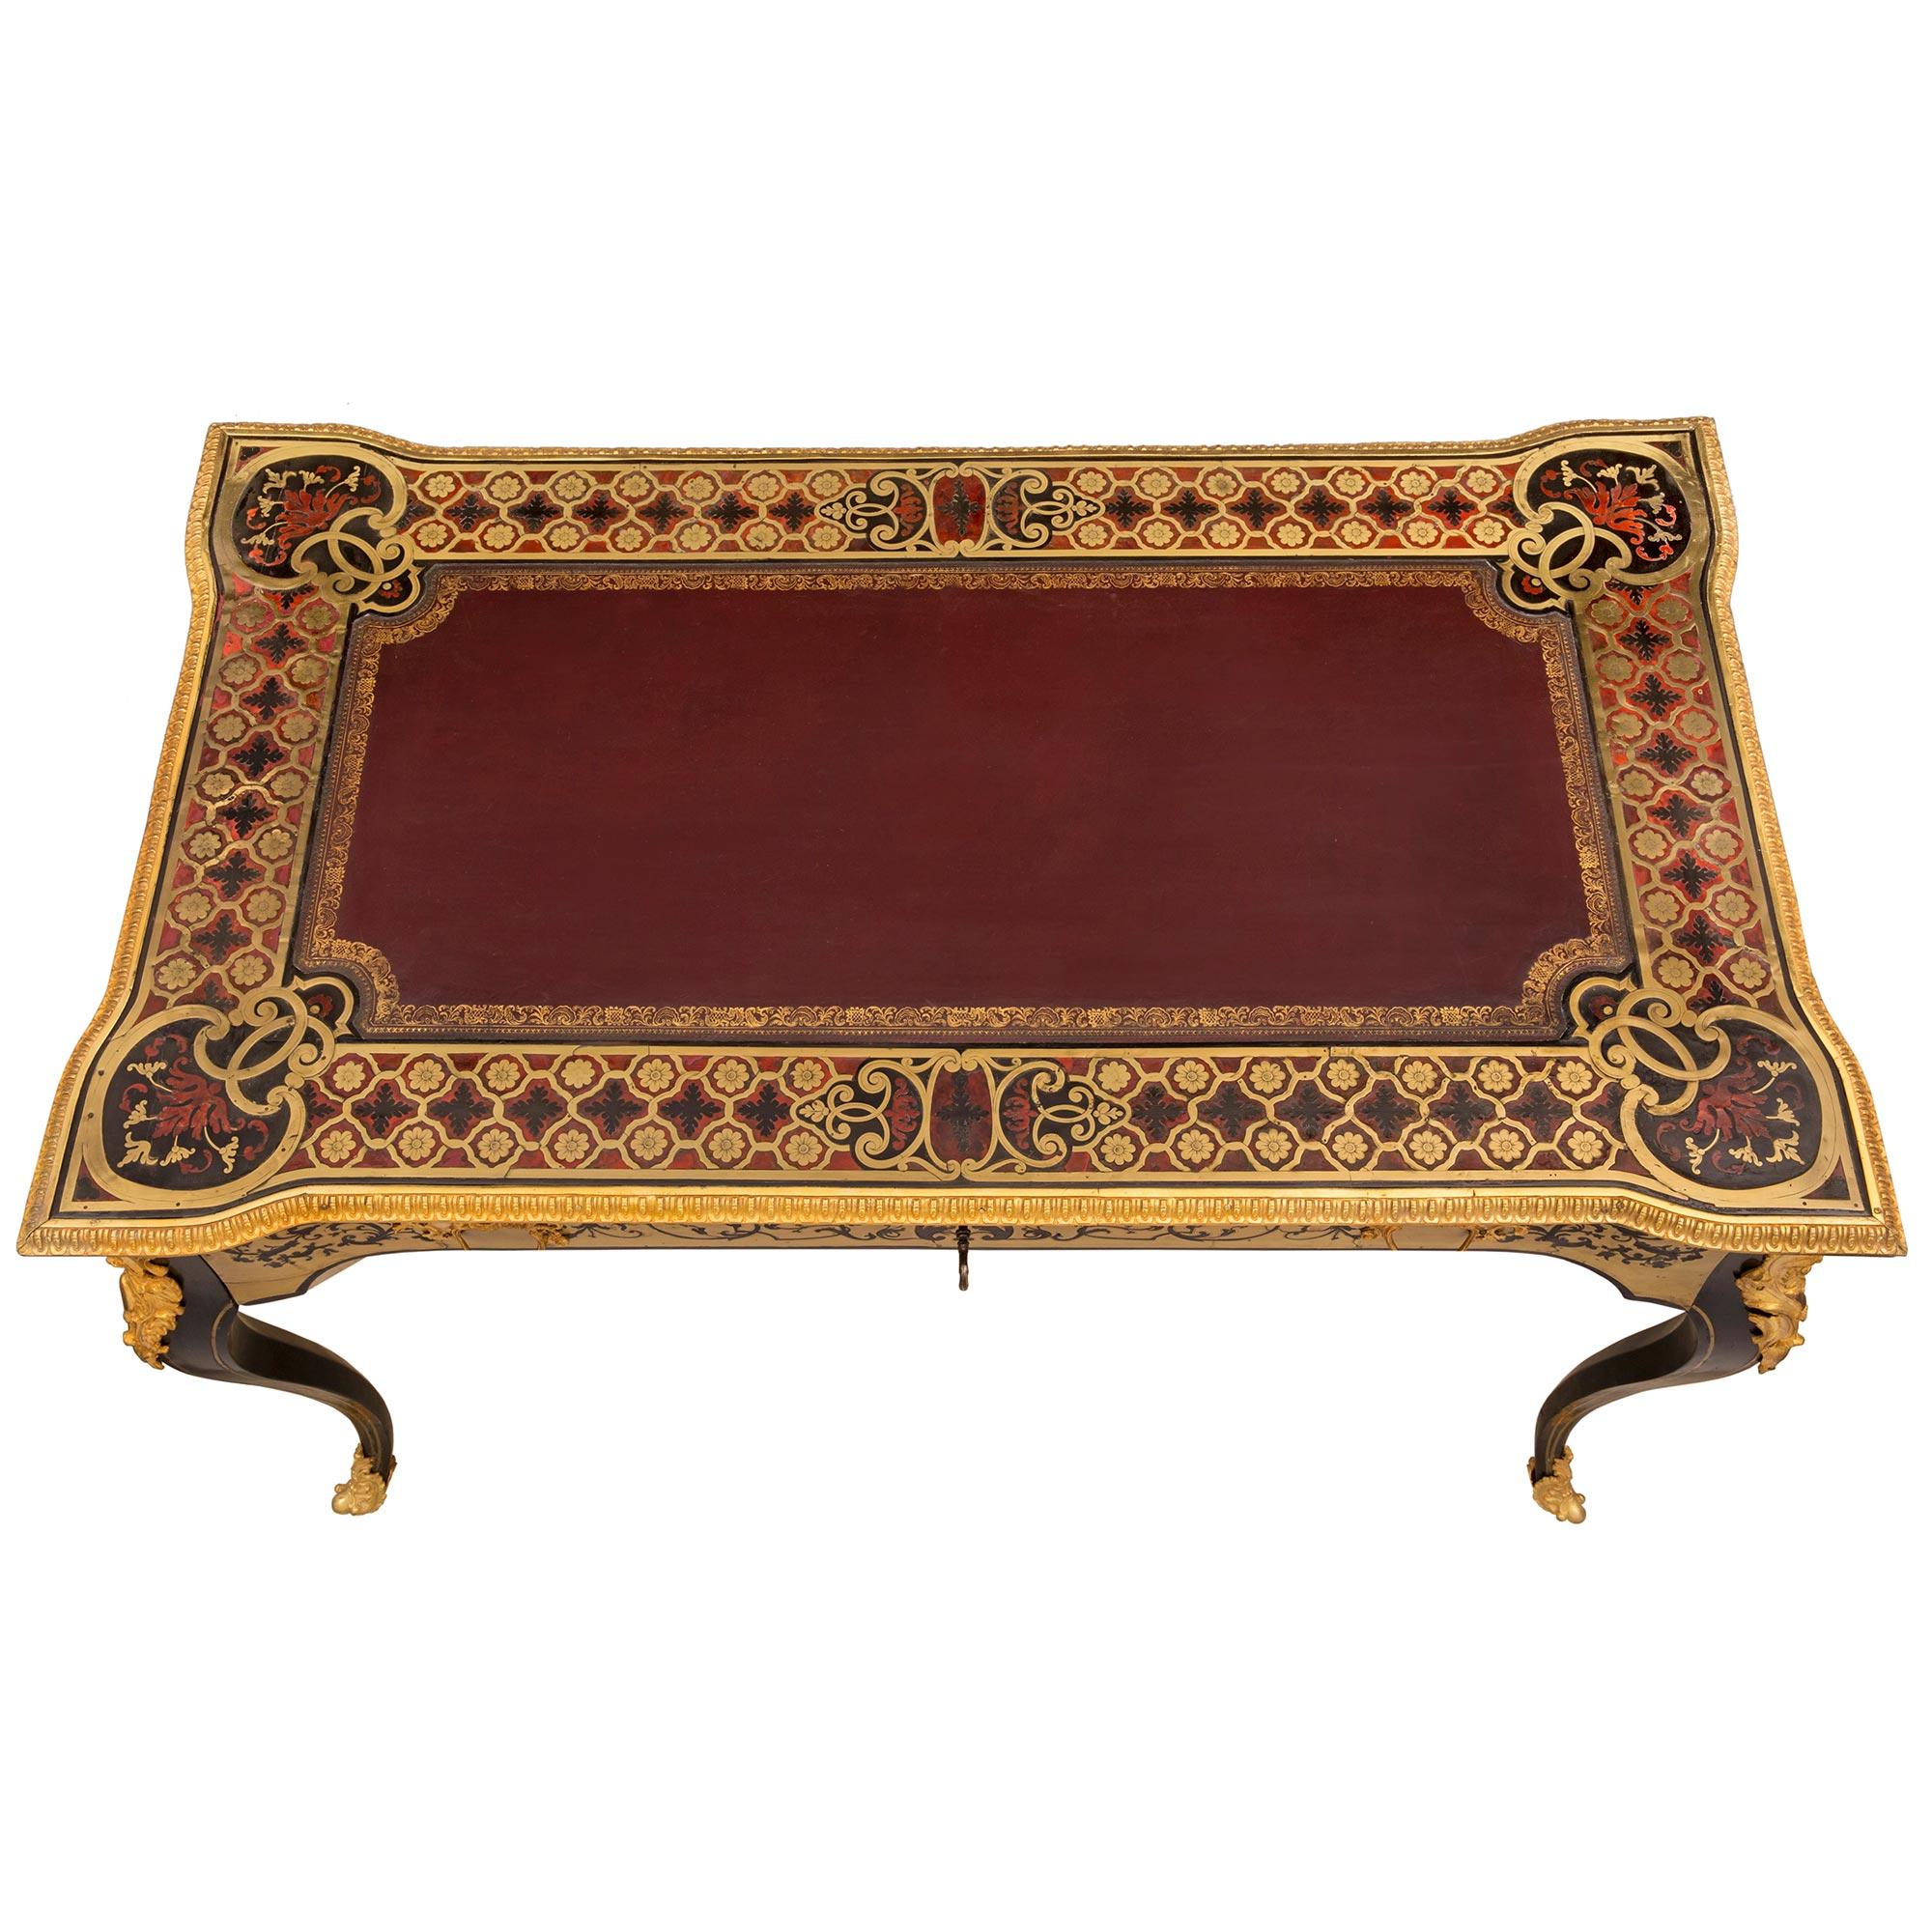 A stunning and unique French 19th century Louis XV st. ebony, tortoiseshell, brass, and leather Boulle st. desk. The desk is raised by four elegant cabriole legs with fine fitted foliate ormolu sabots, lovely brass inlaid filets, and striking richly